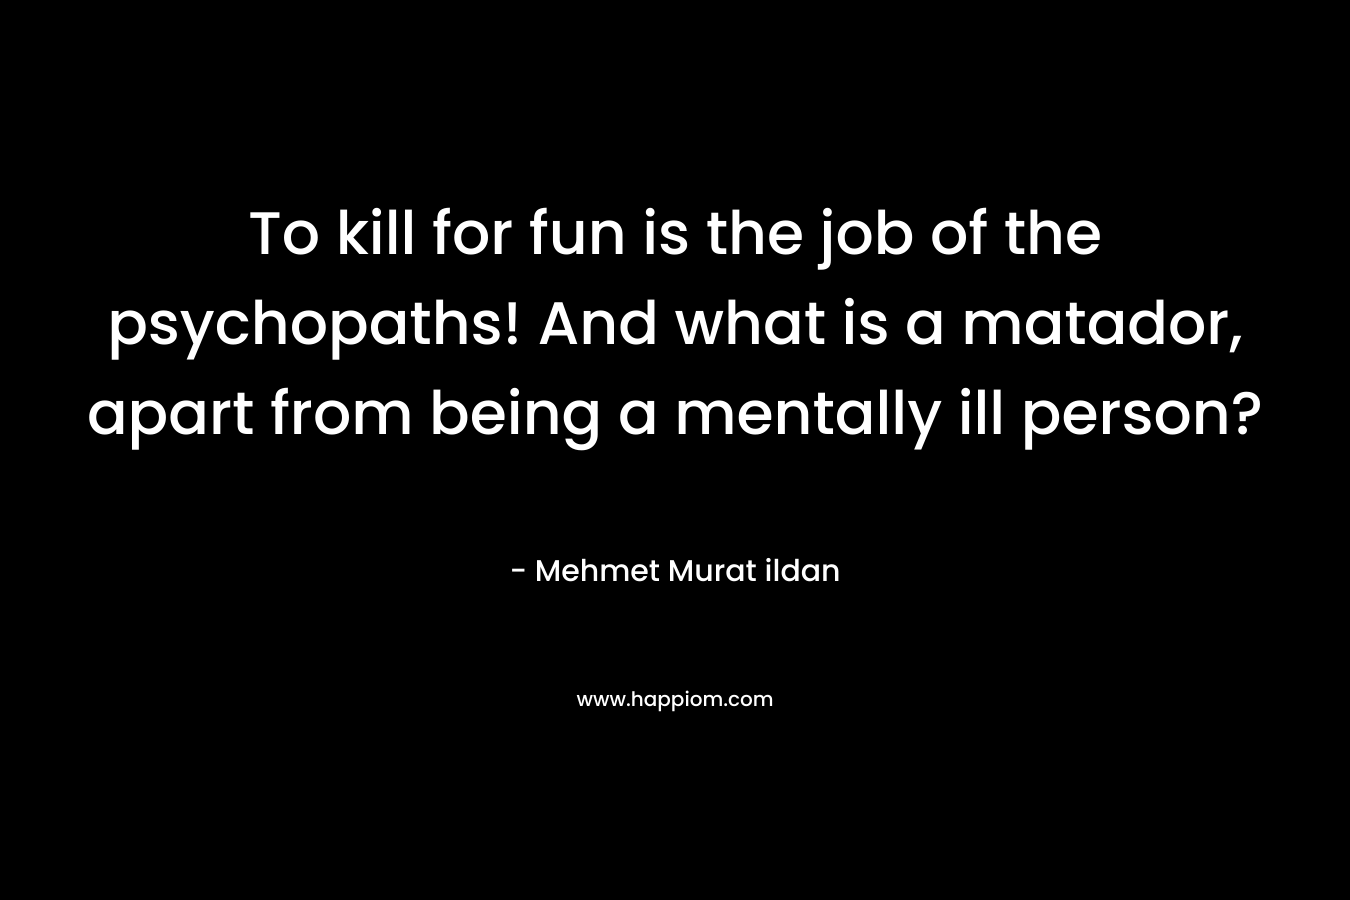 To kill for fun is the job of the psychopaths! And what is a matador, apart from being a mentally ill person? – Mehmet Murat ildan